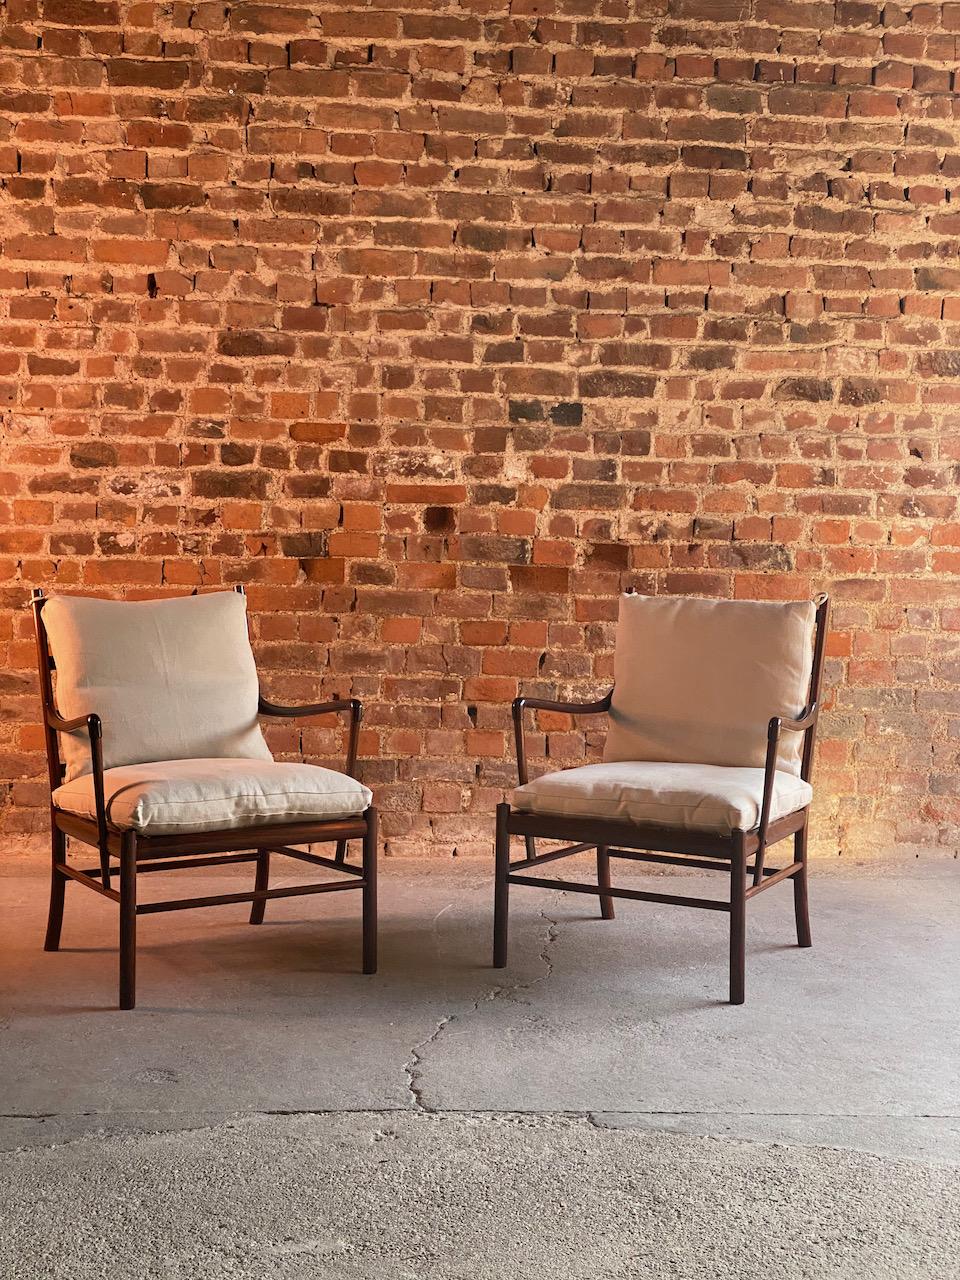 Danish Ole Wanscher Model 149 Rosewood Colonial Chairs Pair by Poul Jeppesens, Denmark